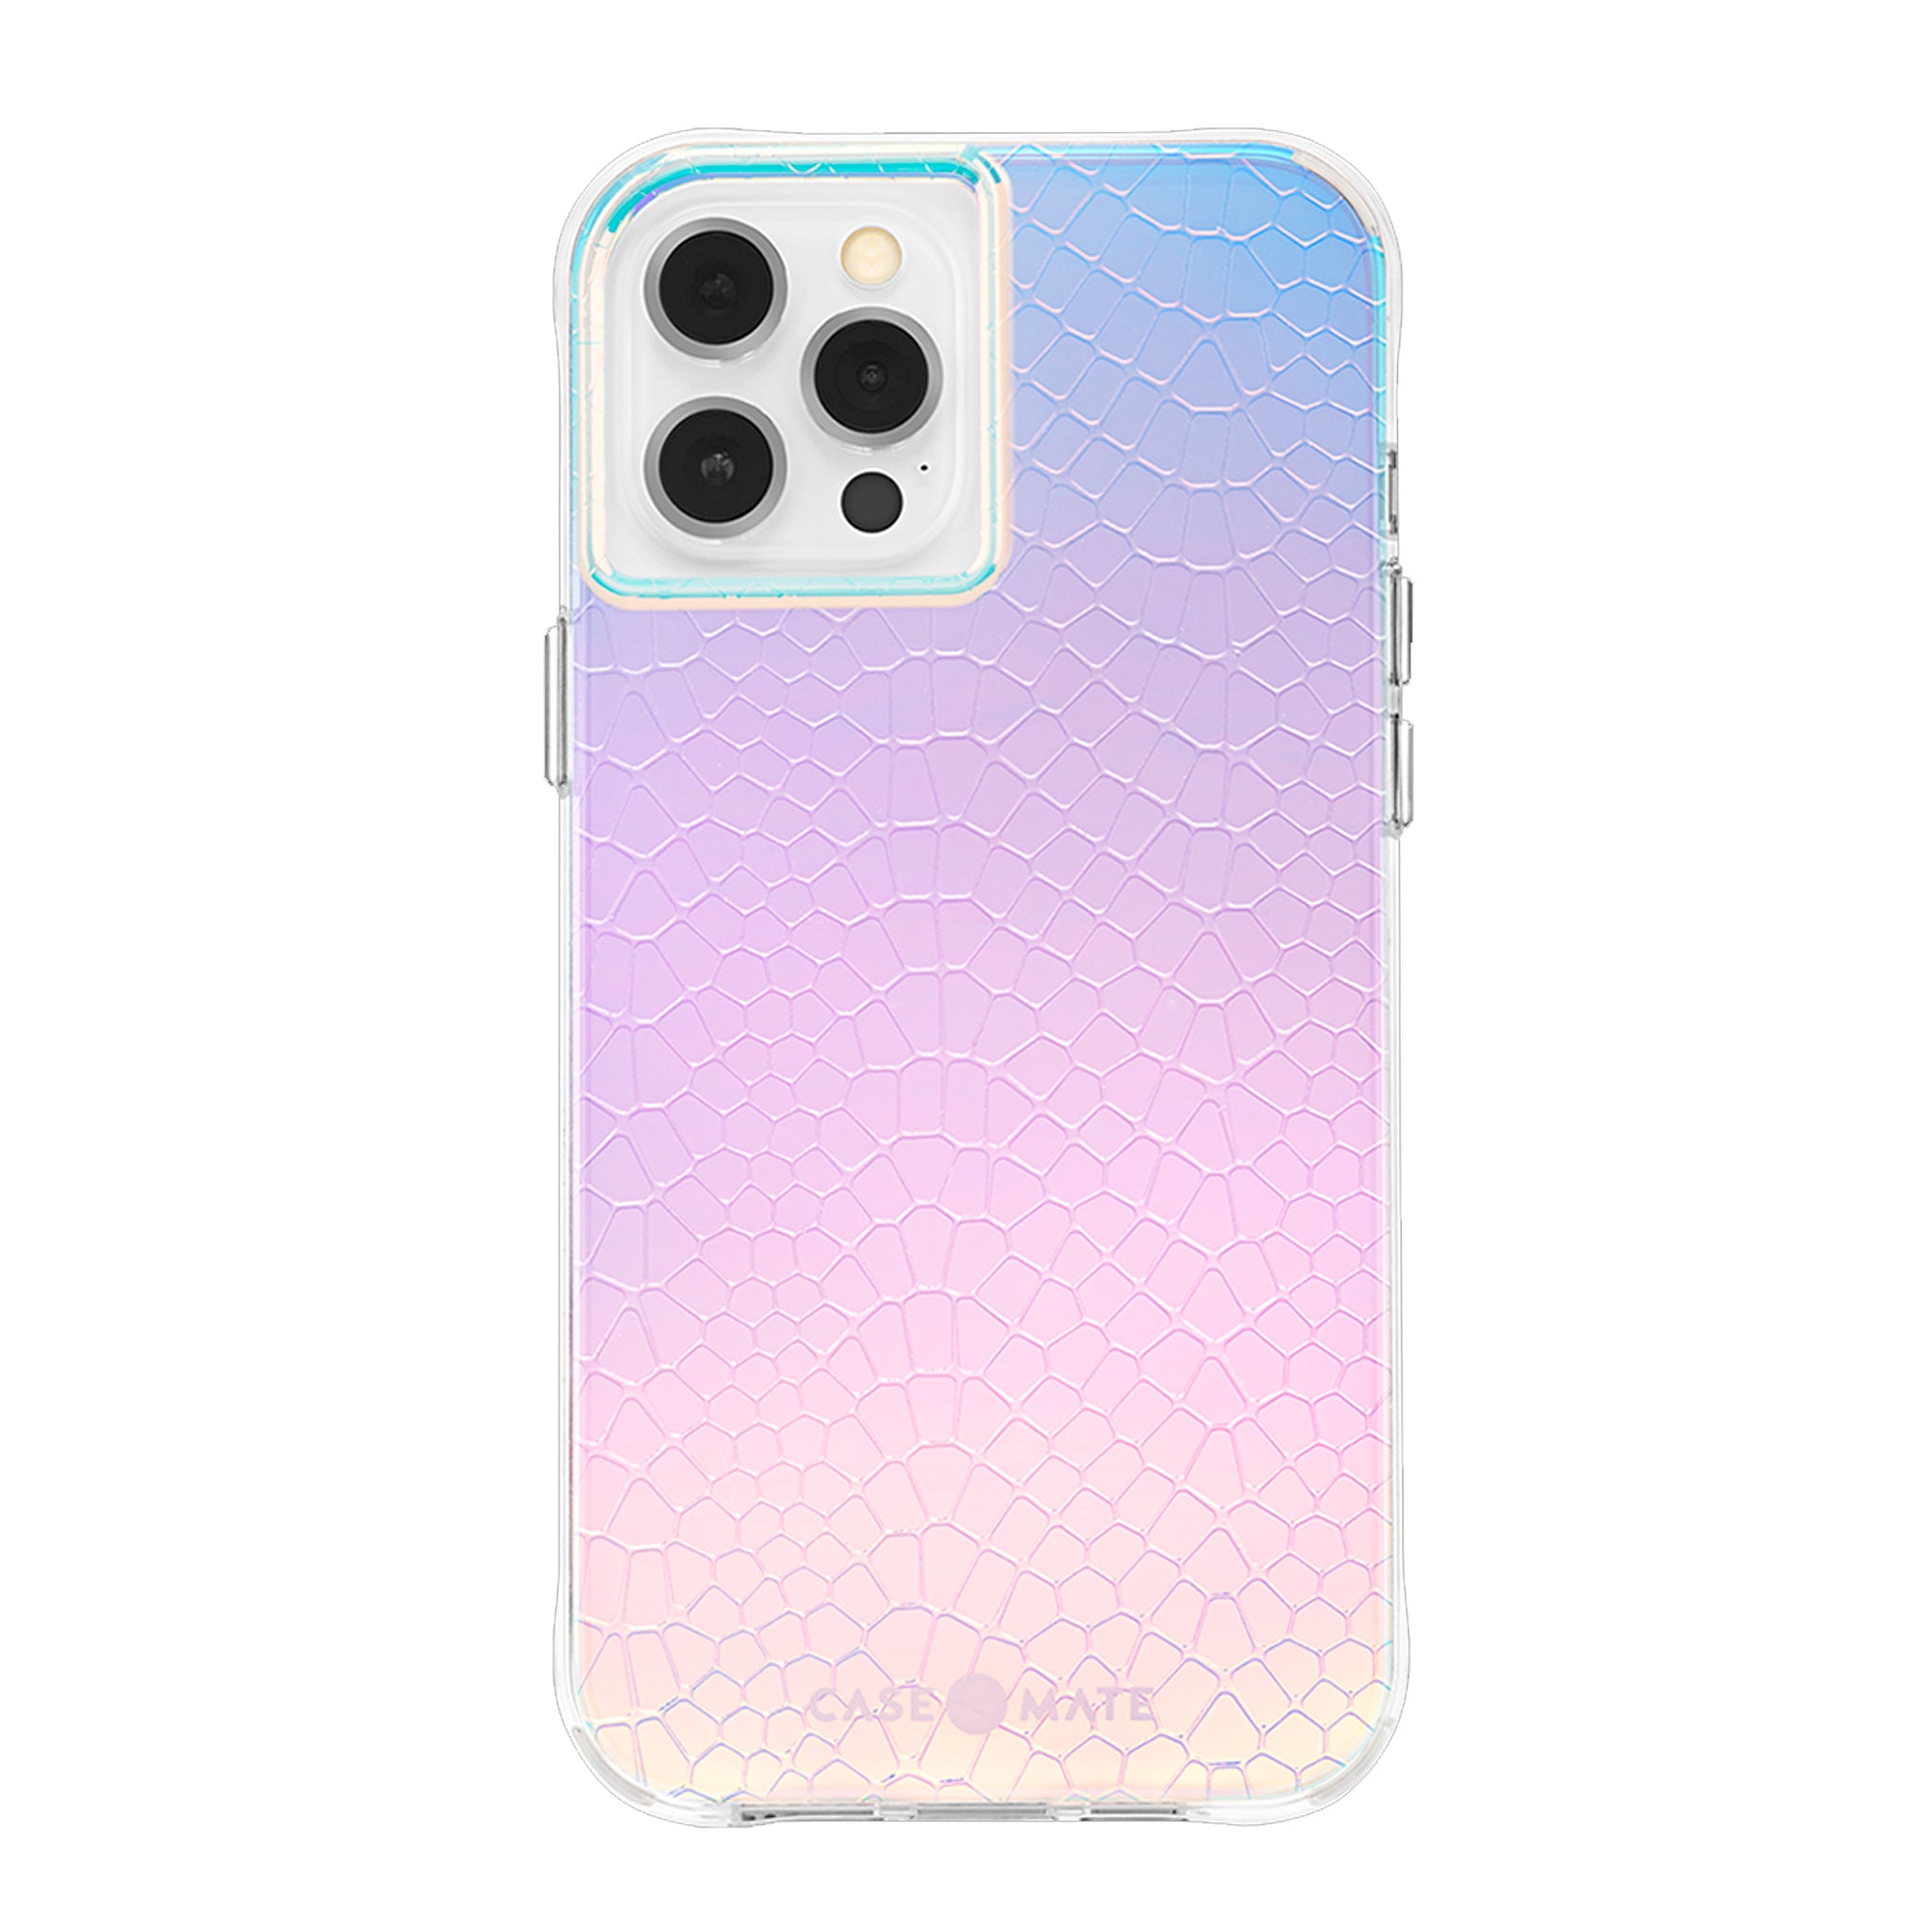 Case-mate - Iridescent Snake Case For Apple Iphone 12 Pro Max - Iridescent Snake